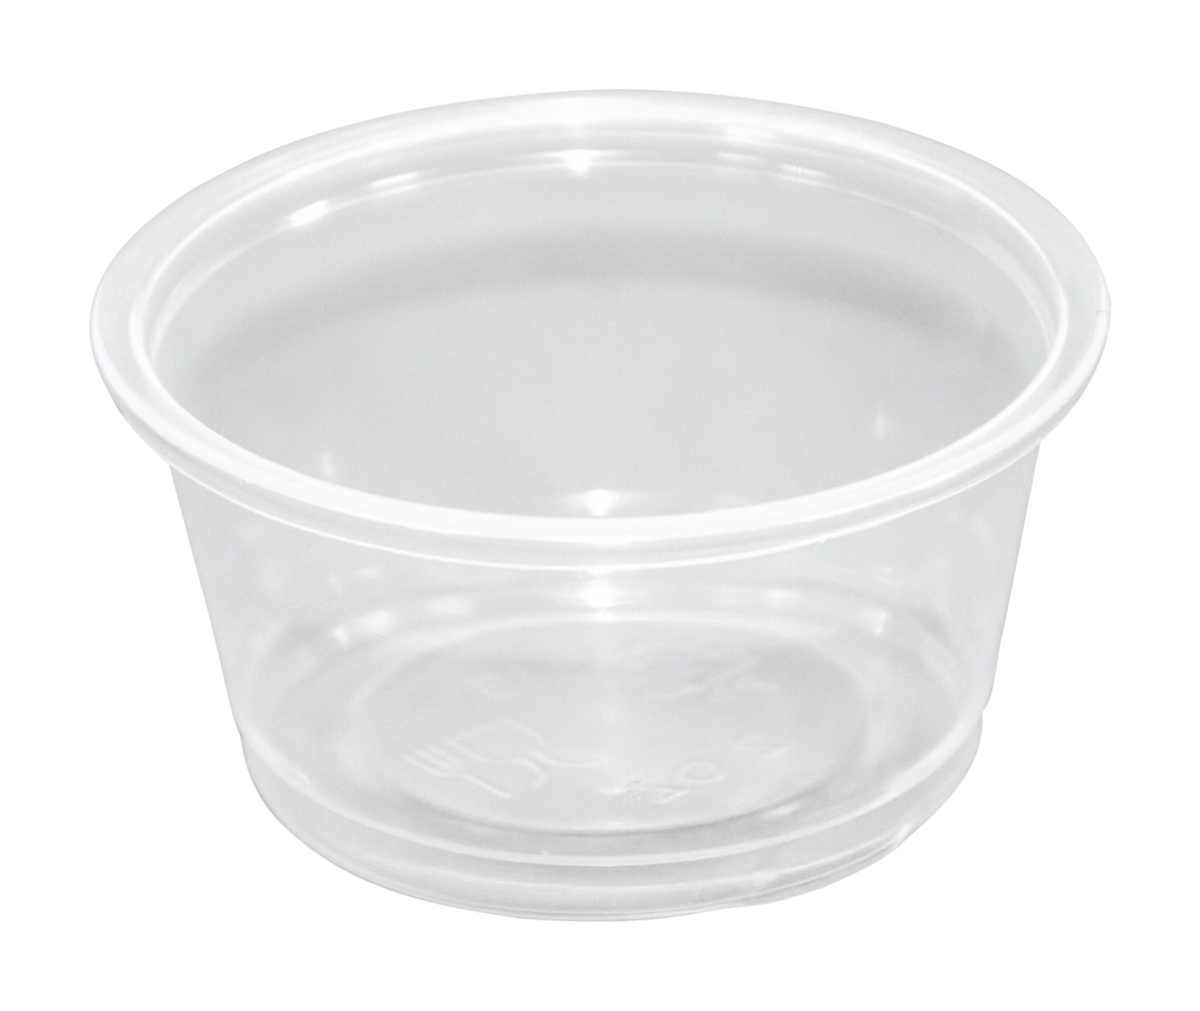 2003383 2 Oz Portion Cups, Clear - Pack Of 2500